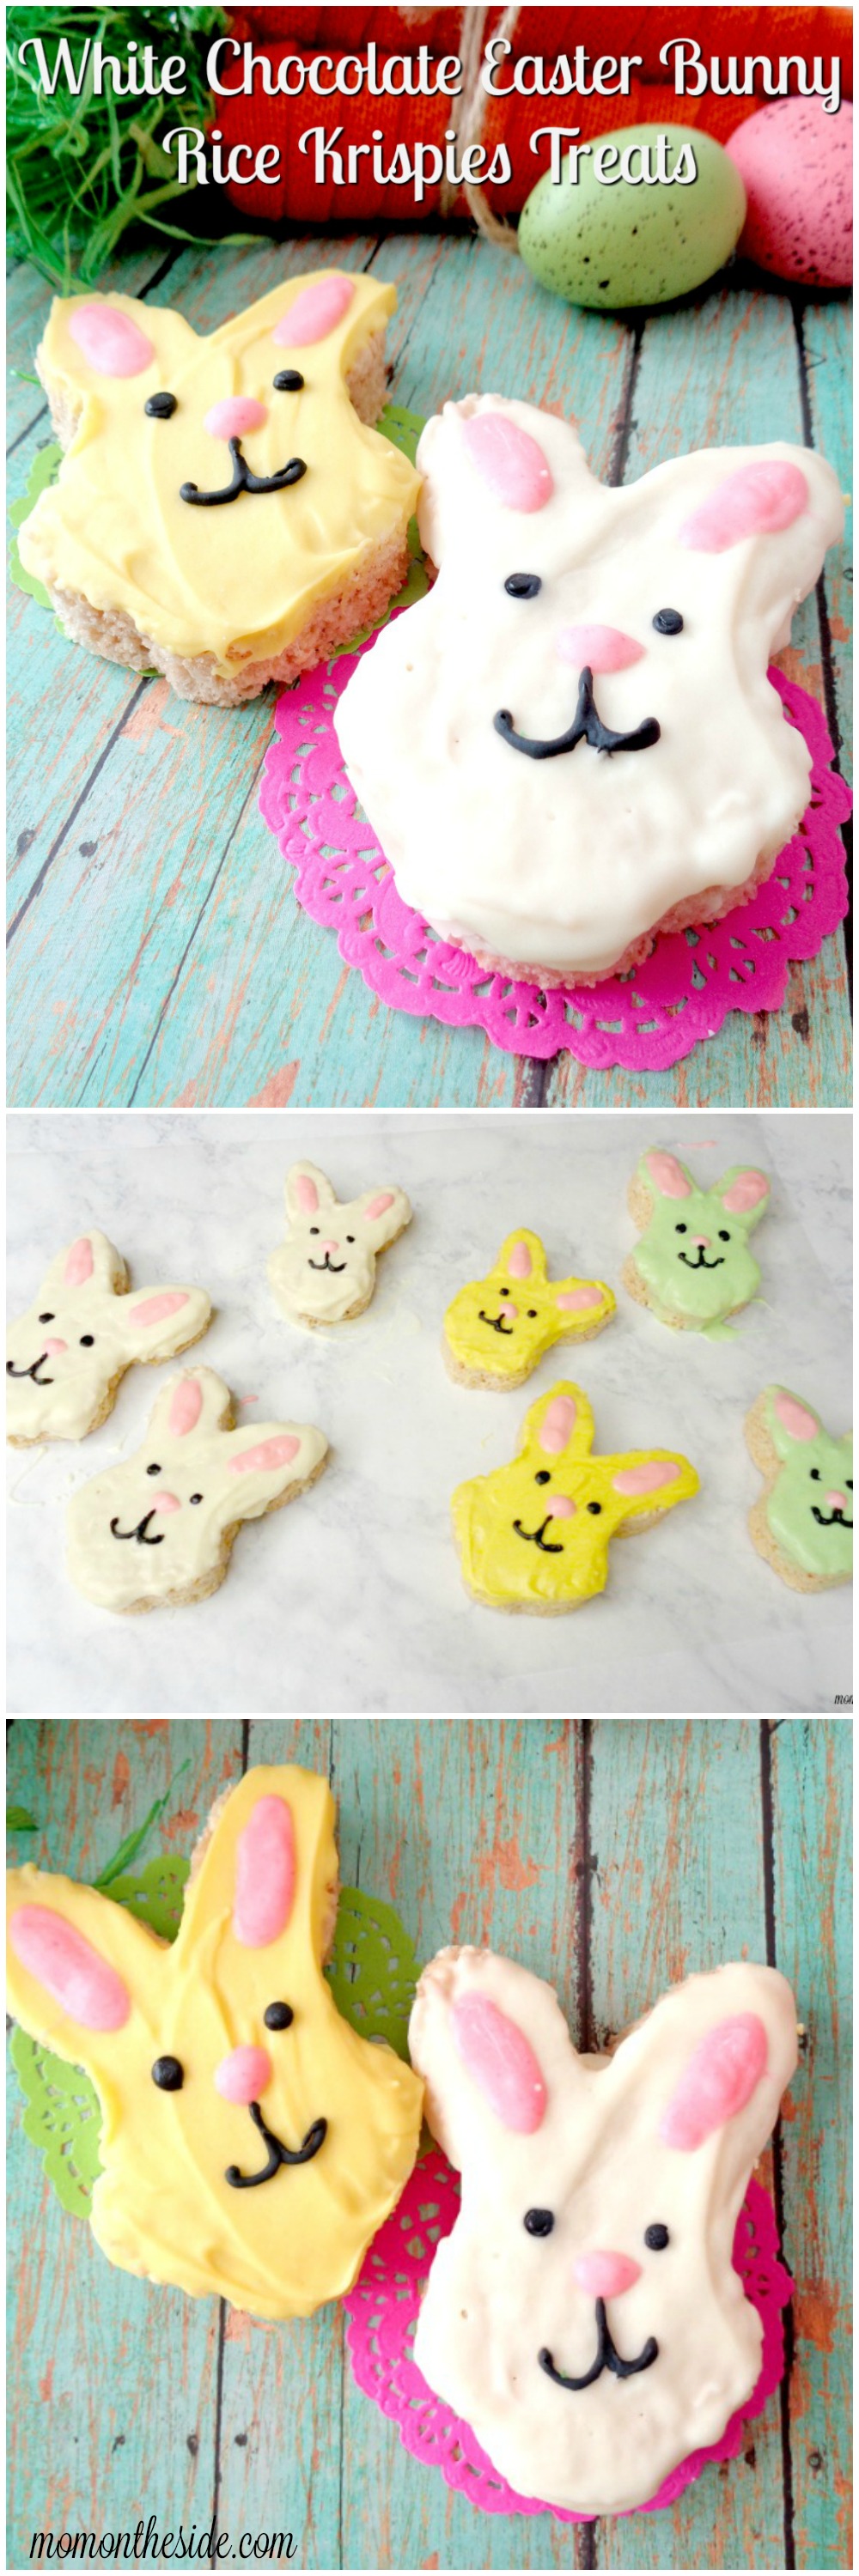 If you are looking for a fun Easter dessert, these White Chocolate Easter Bunny Rice Krispies Treats will put smiles on the faces of all your Easter party guests!